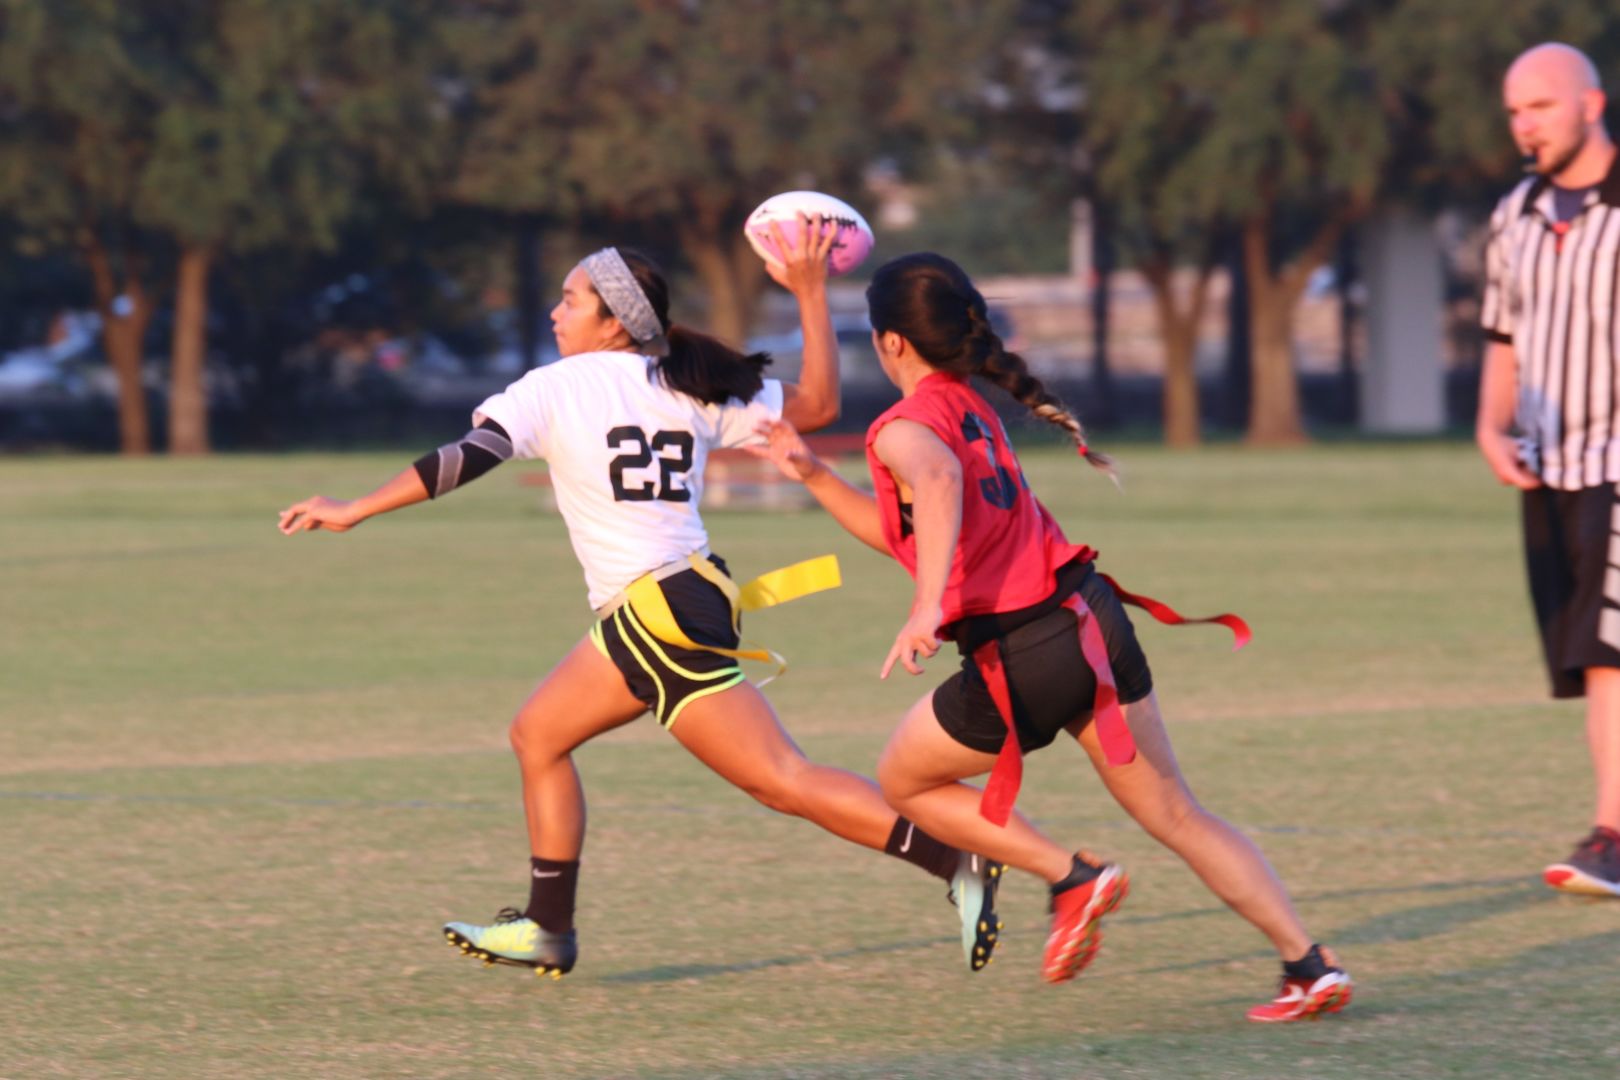 Intramural sports can have a positive impact on those wishing to compete in organized athletics. | Courtesy of UH Rec